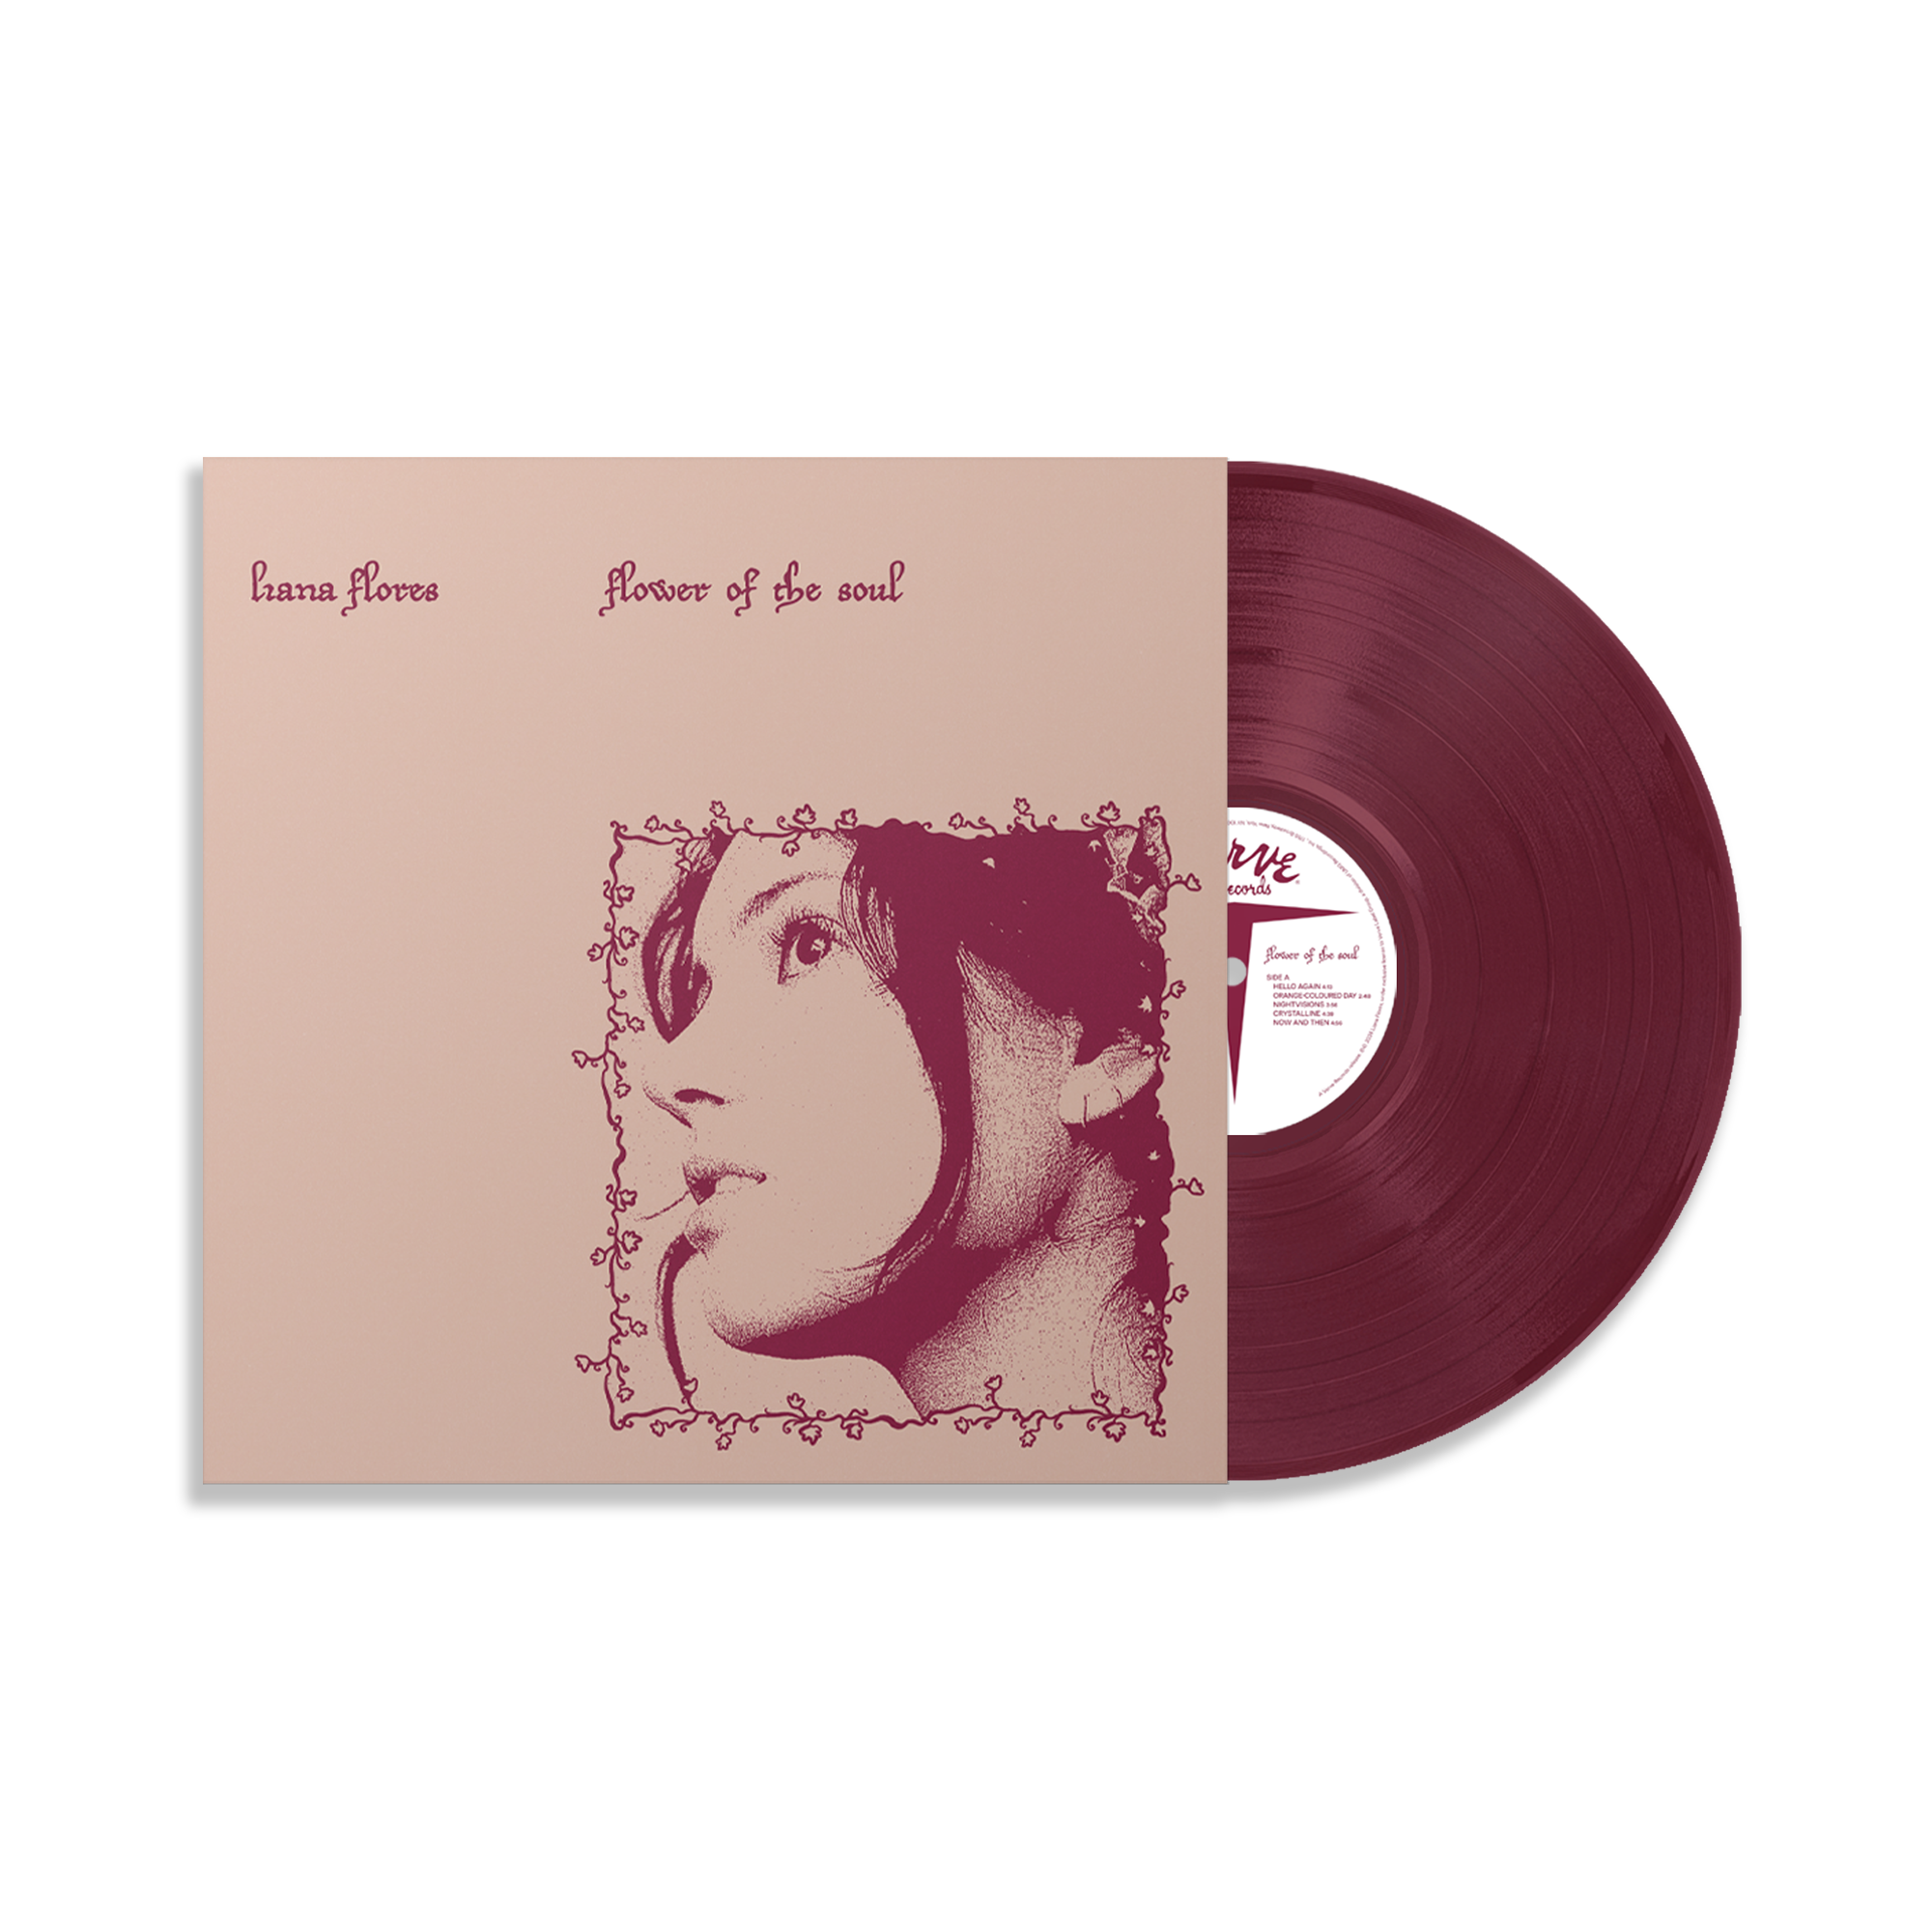 Flower of the soul: limited summer berry vinyl lp + liana flores white tee